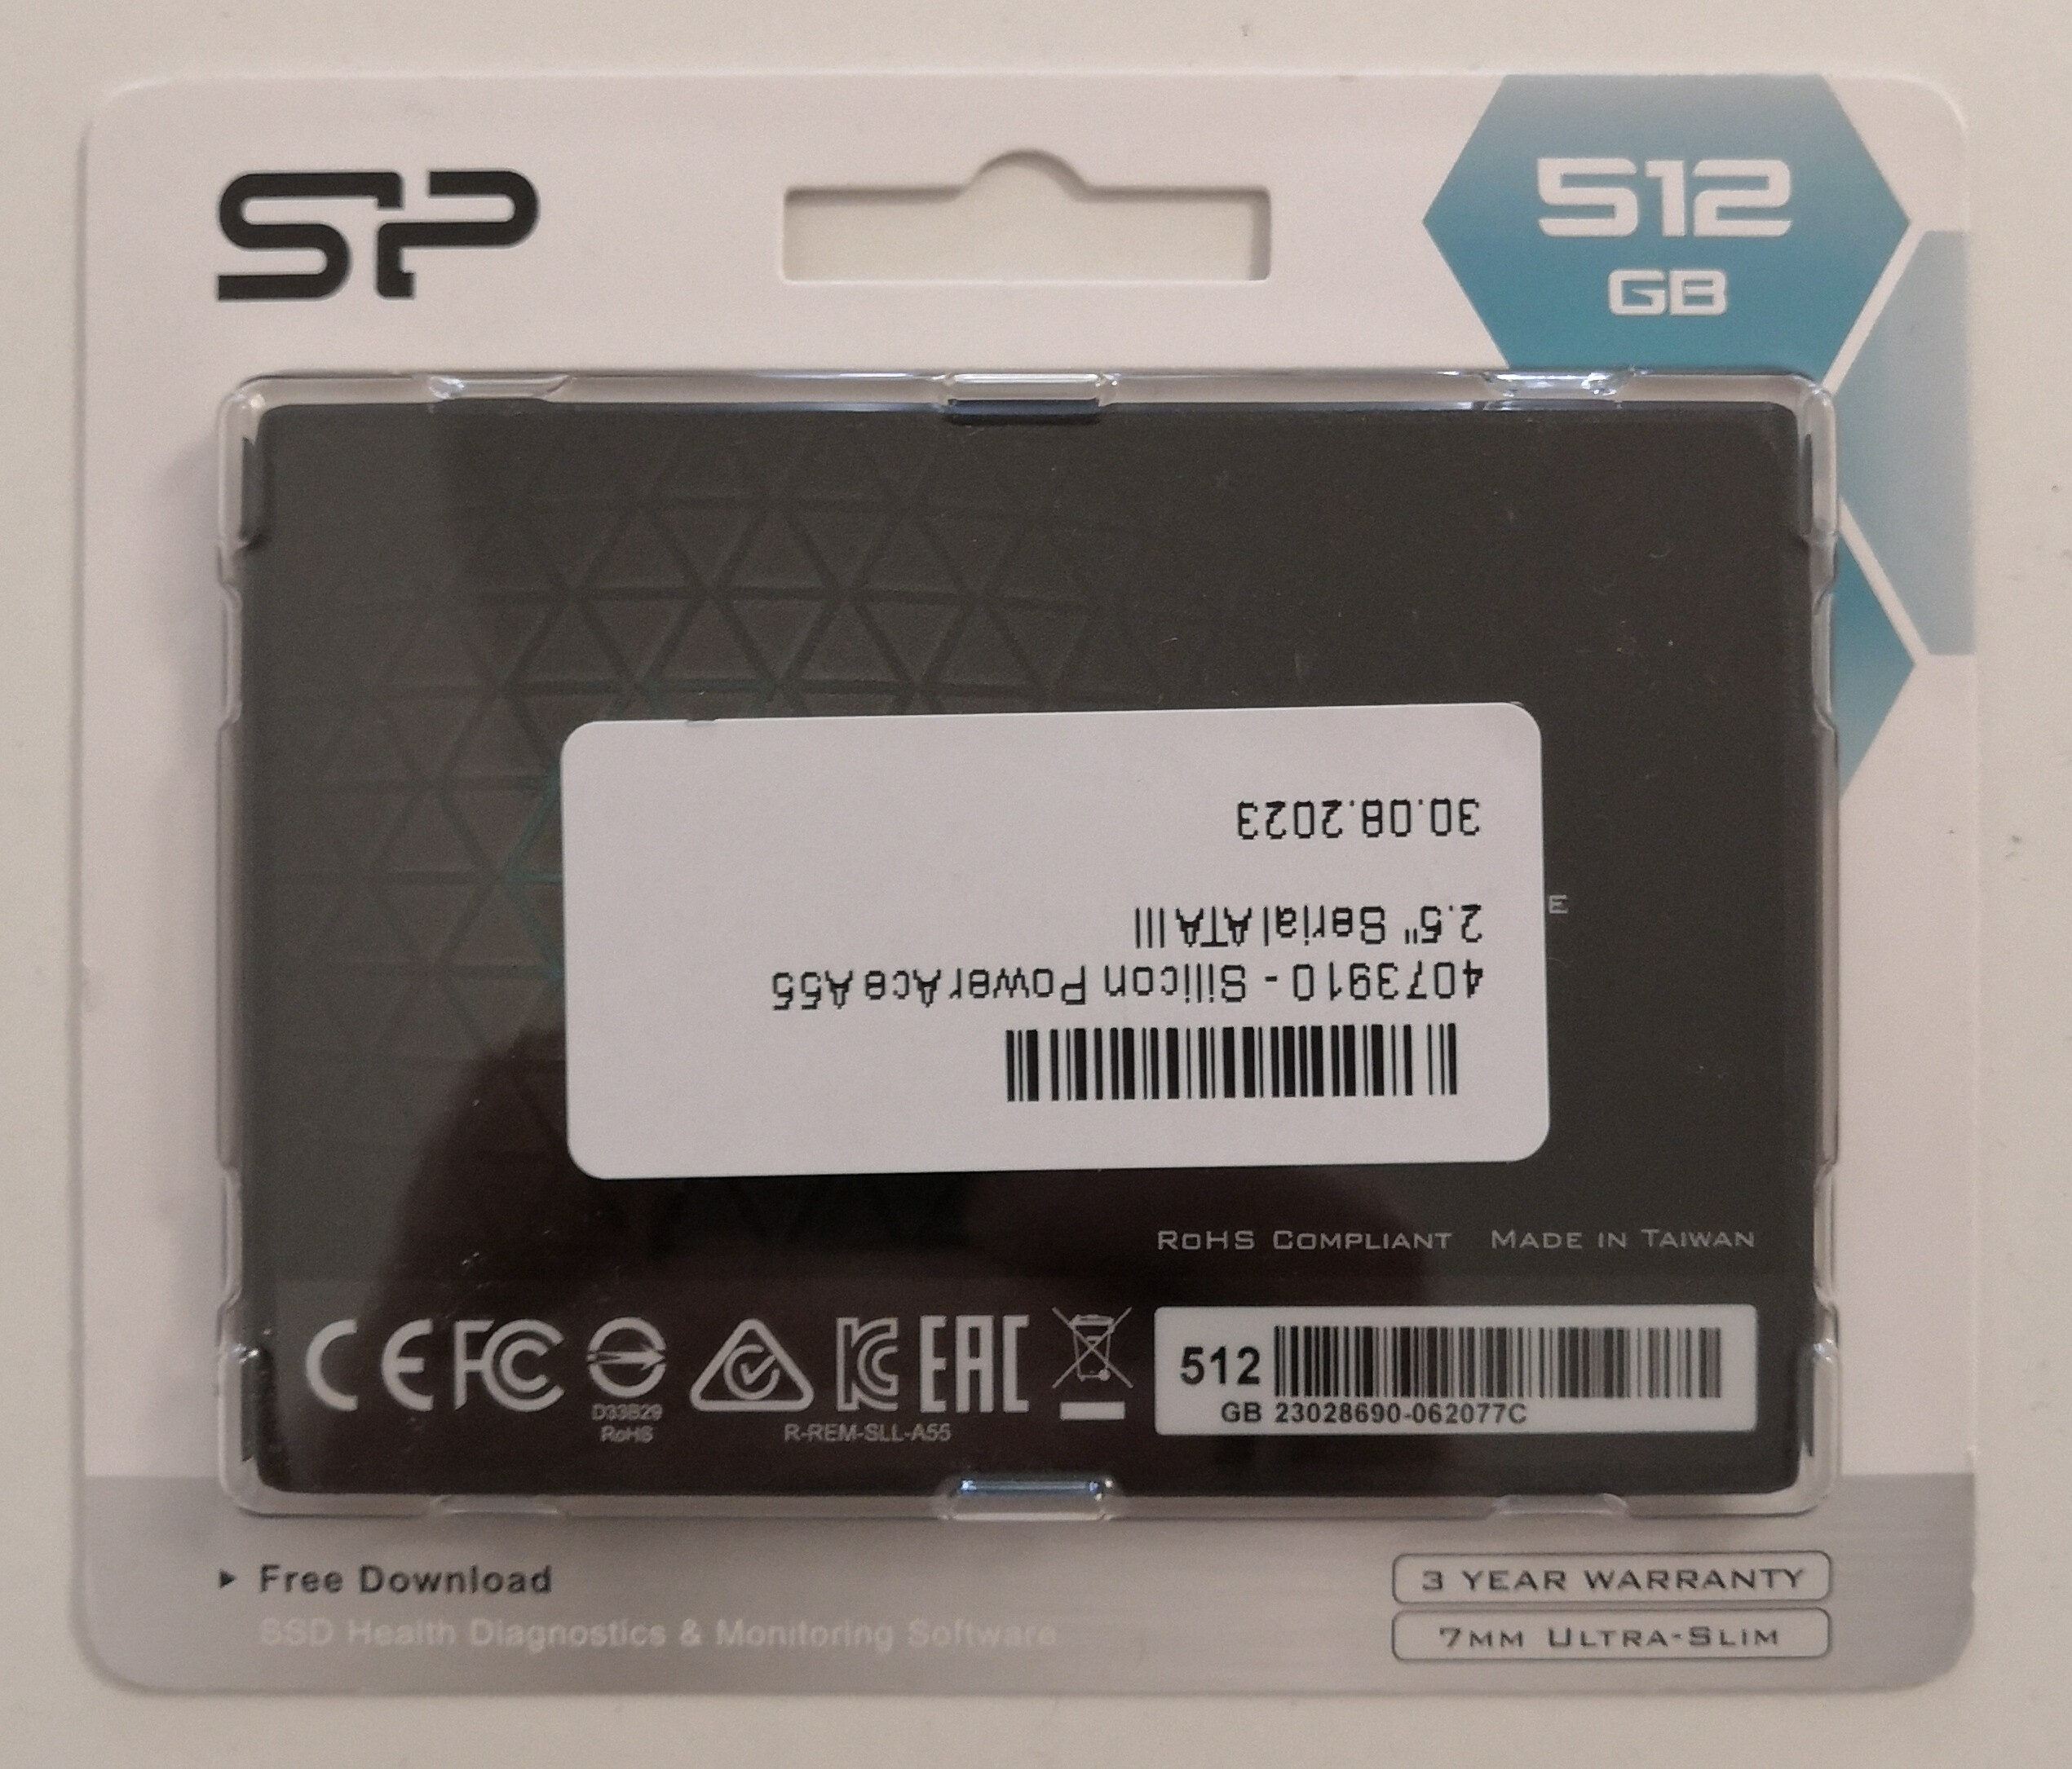 2.5" SATA III Solid State Drive Ace A55 - Product - de